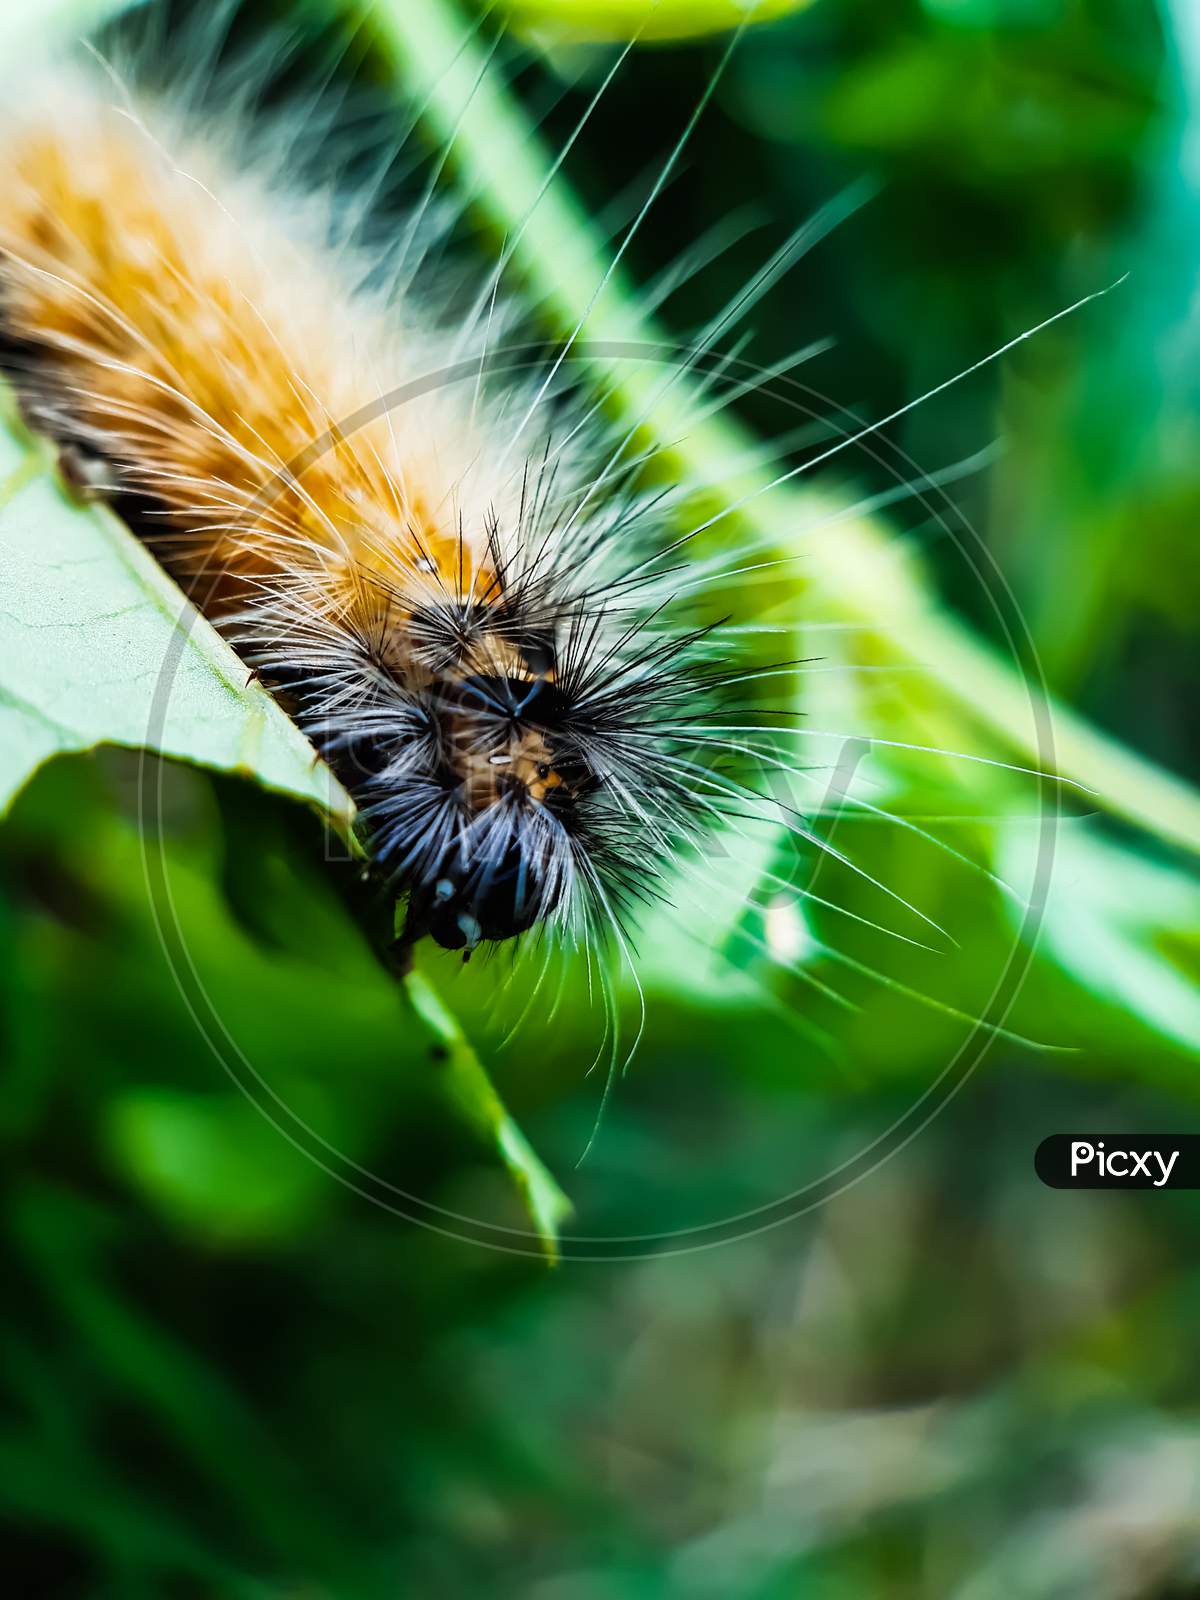 A Yellow-Black Caterpillar Is Sitting On The Leaves Of A Green Vegetable Tree And Eating The Leaves, Causing Great Damage To The Crop.